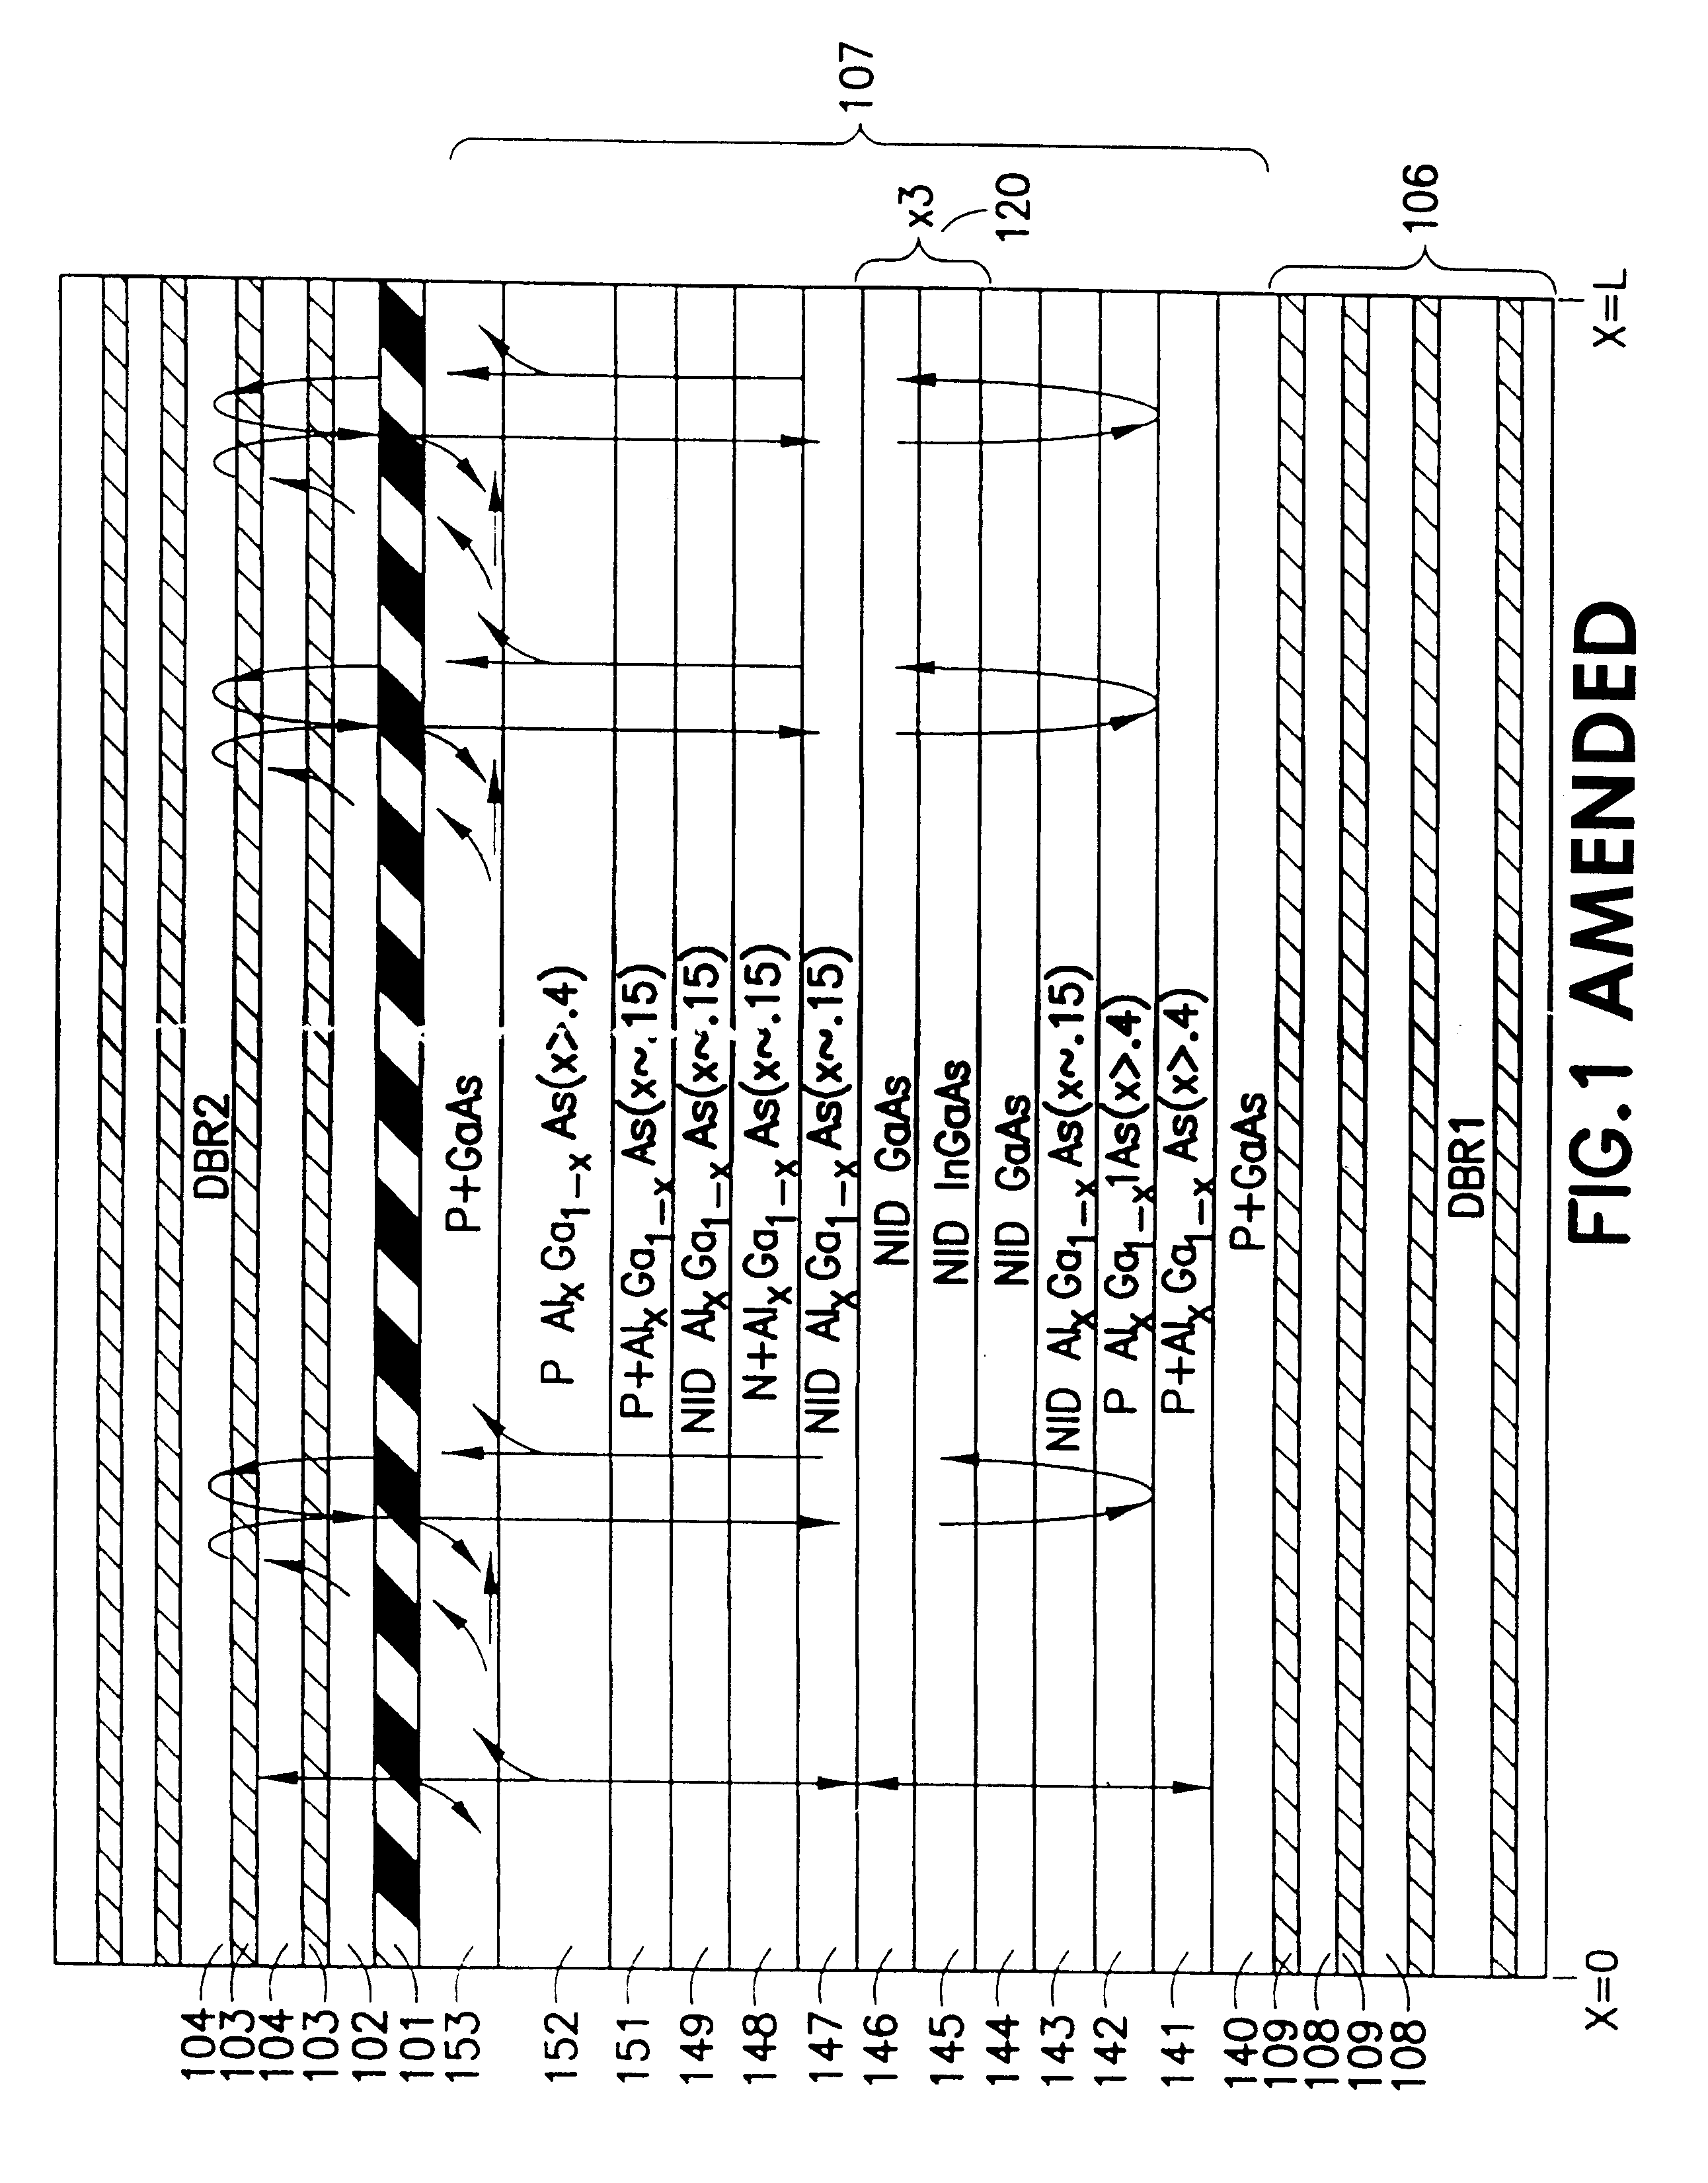 Grating coupled vertical cavity optoelectronic devices